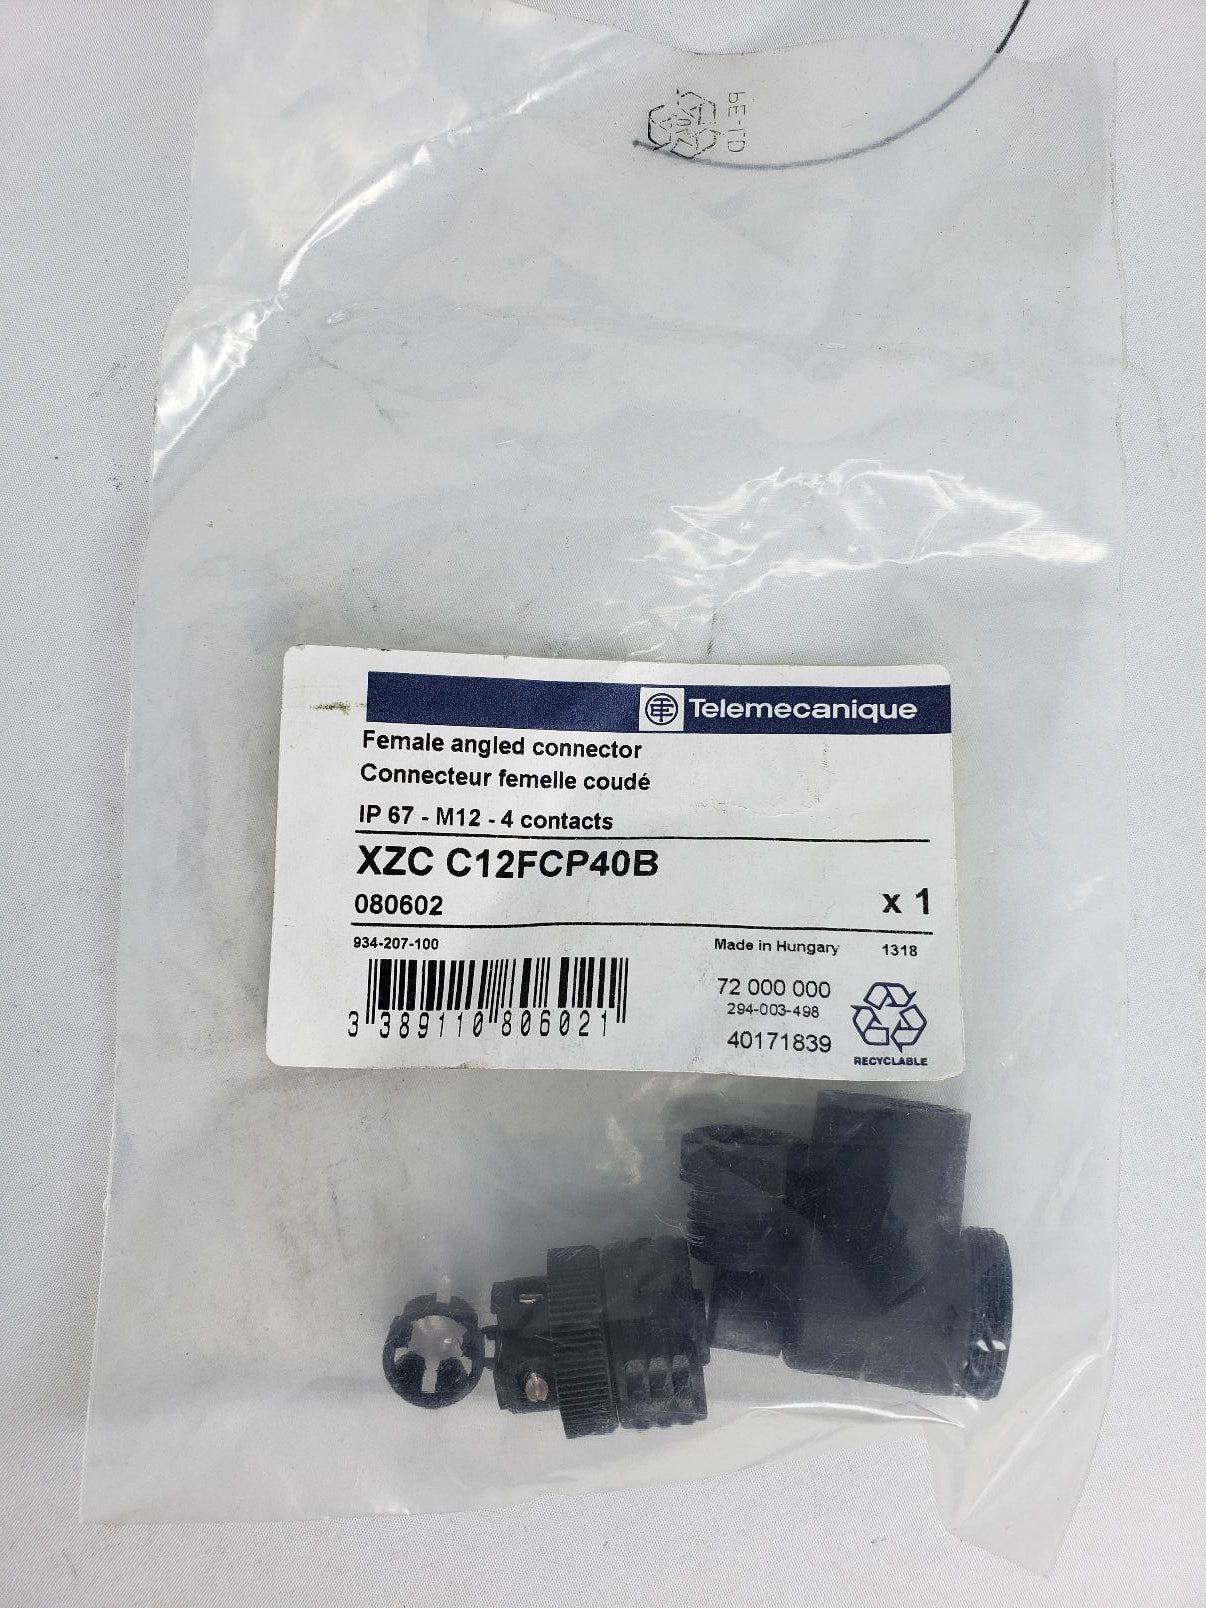 Schneider Electric Telemecanique Female, M12, 4 pin, Elbowed Connector, Cable Gland Pg 7